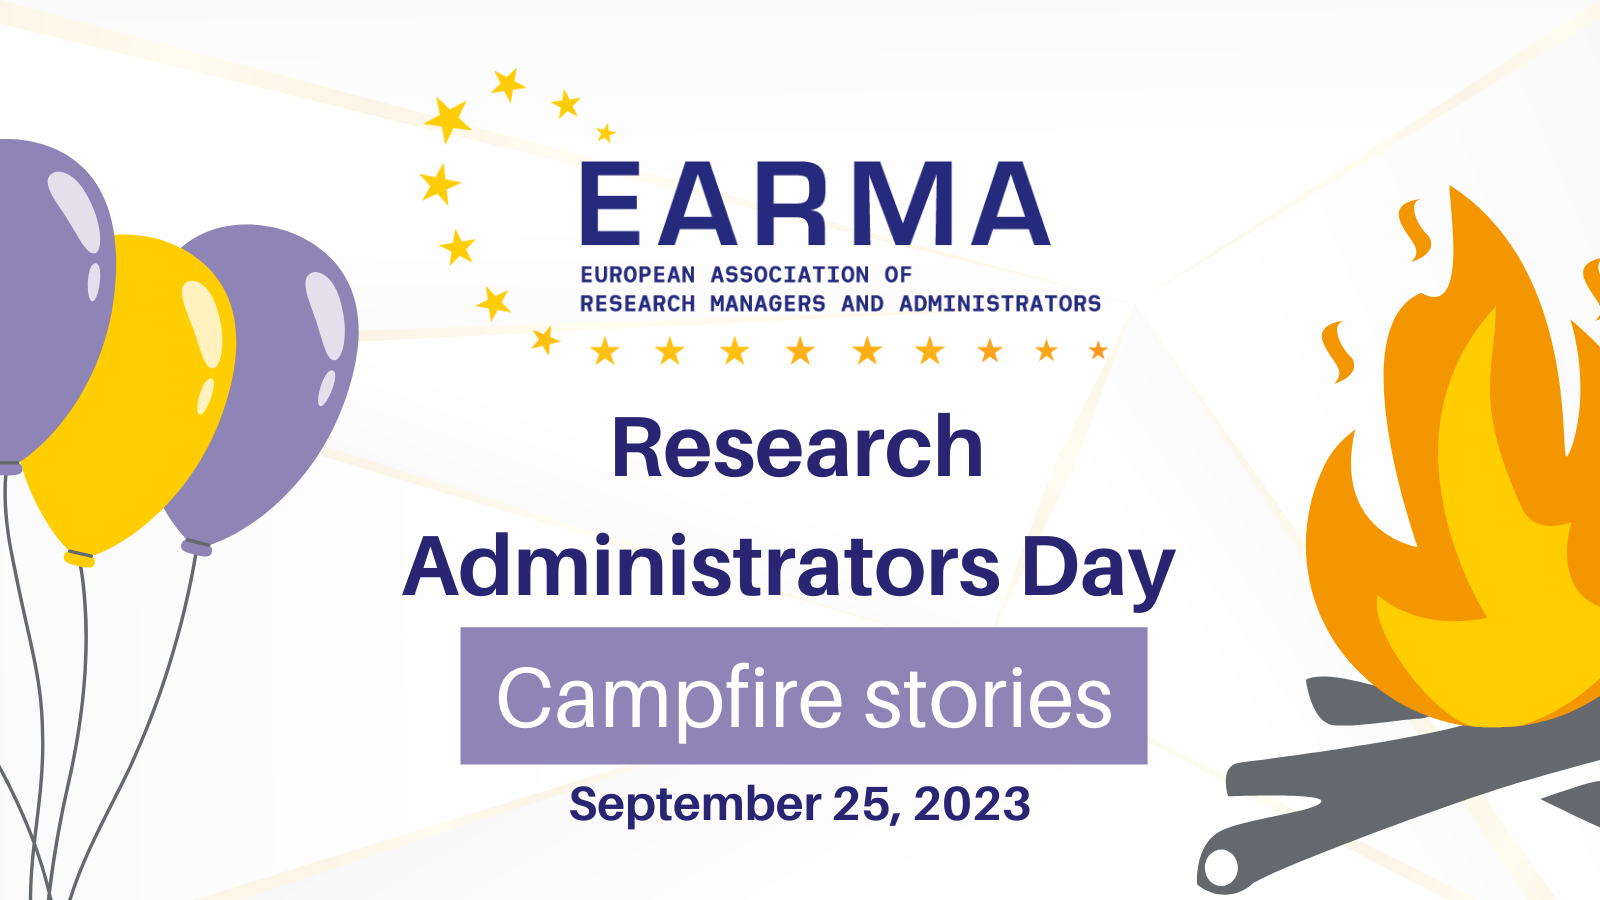 Campfire stories RMA day 2023 edition